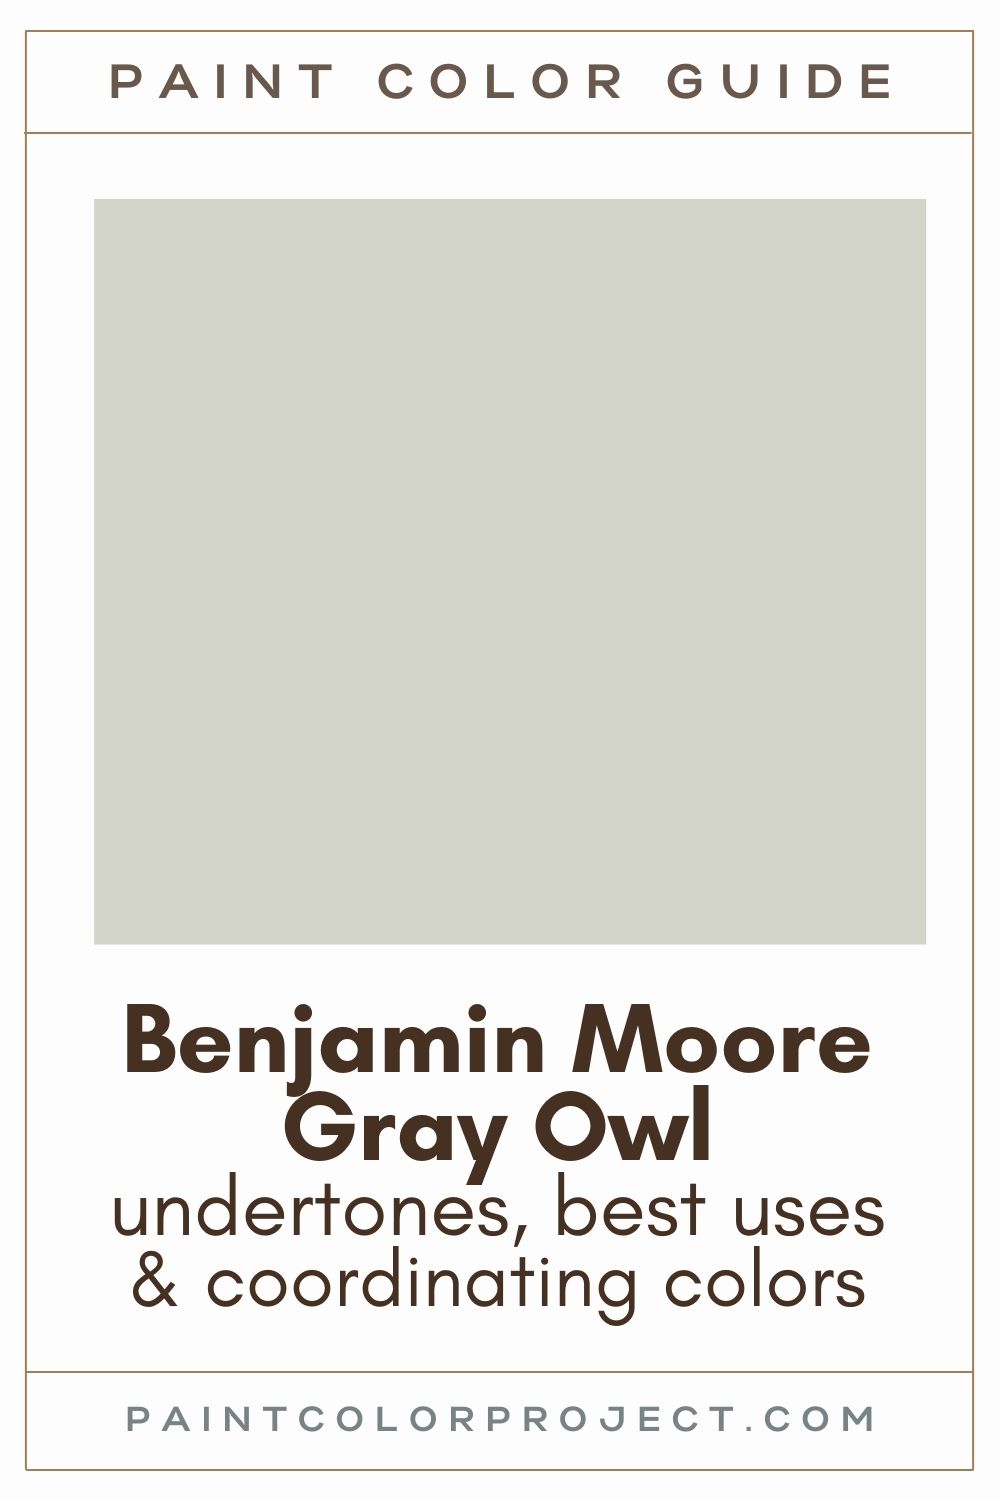 Benjamin Moore Gray Owl: a complete color review - The Paint Color Project